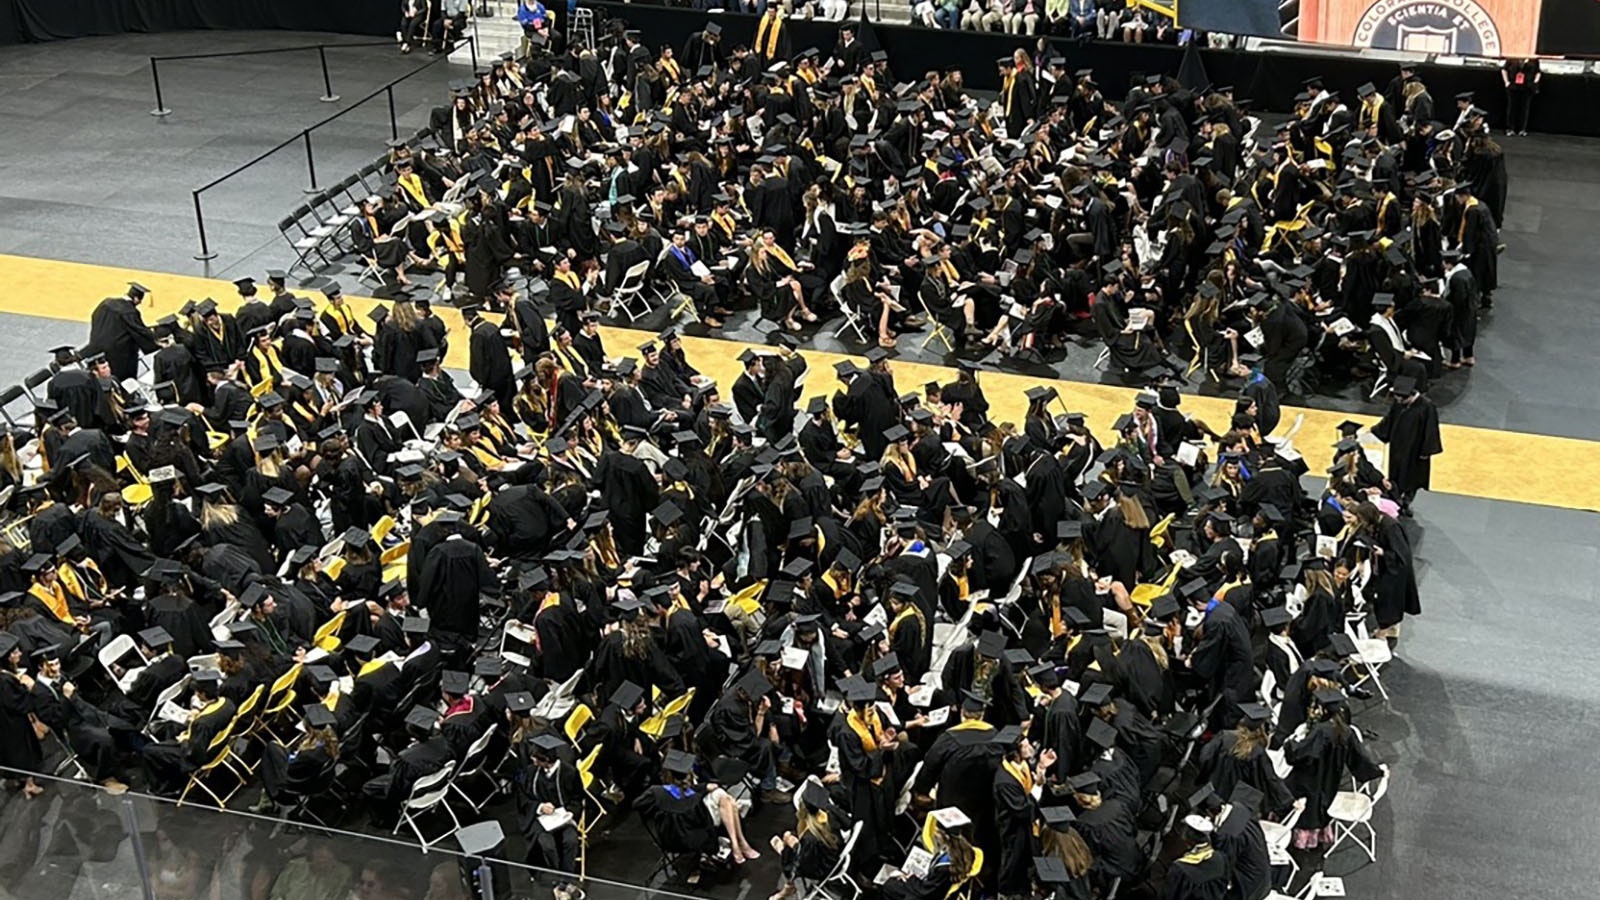 As Liz Cheney was introduced as the keynote speaker Sunday for the graduating class of Colorado College, some students turned their chairs to put their backs to her on stage, which is to the right out of frame.